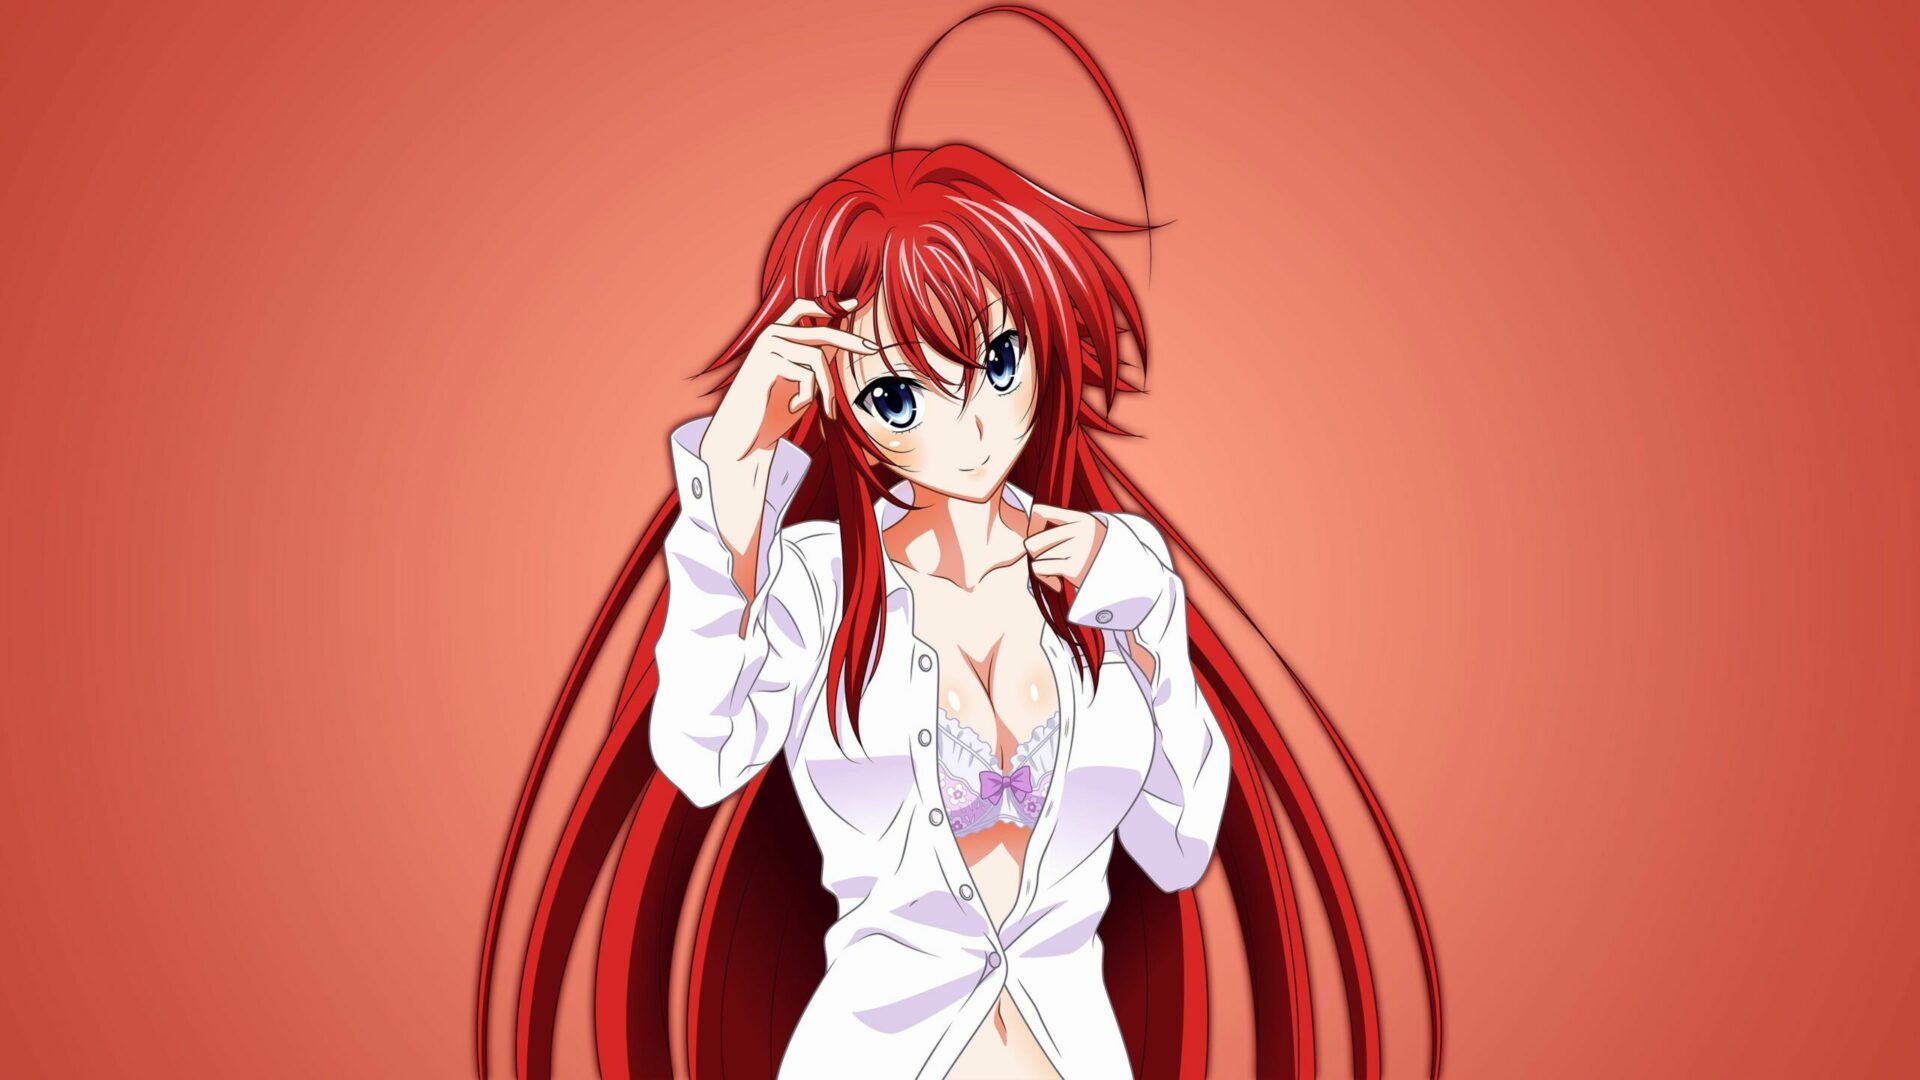 Highschool DxD Season 5 Hints & Updates!, Highschool DxD Season 5 Hints &  Updates! Any fans here of Highschool DXD? Interview Source:   #highschooldxd #anime Follow Our, By Daily Anime